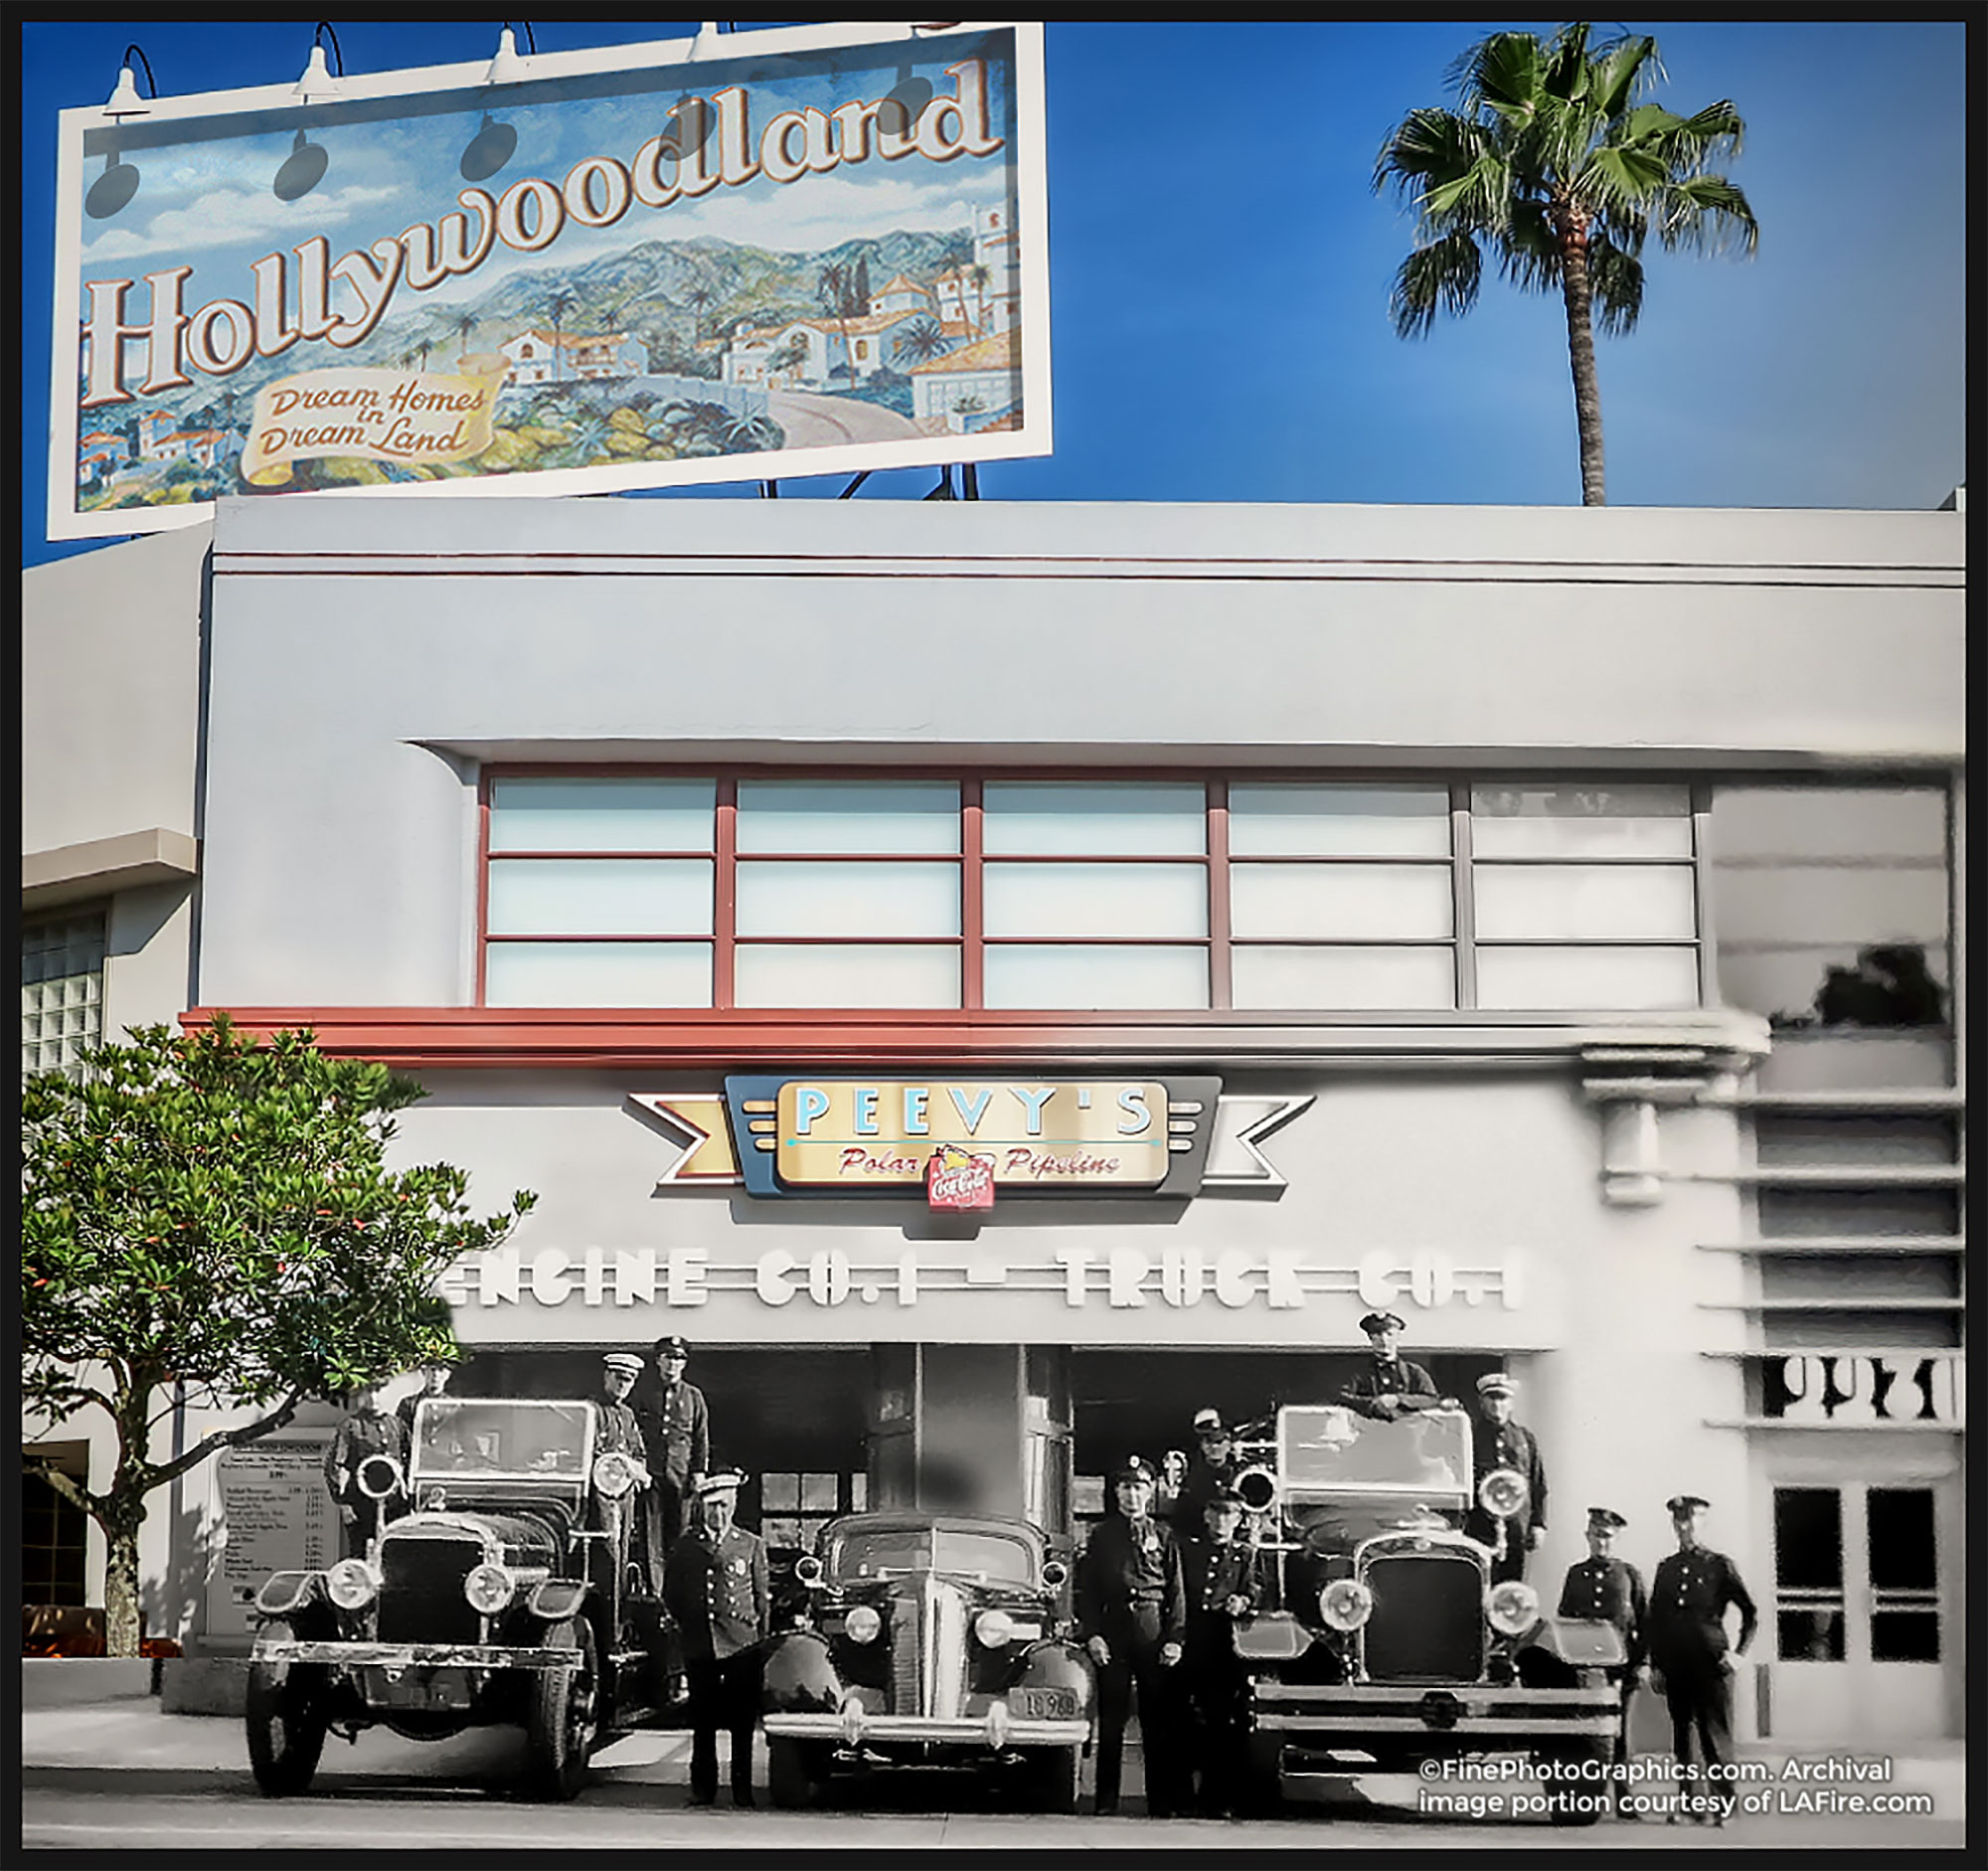 Discover the history and influence on the design of Disney's Hollywood Studios |PassPorter.com